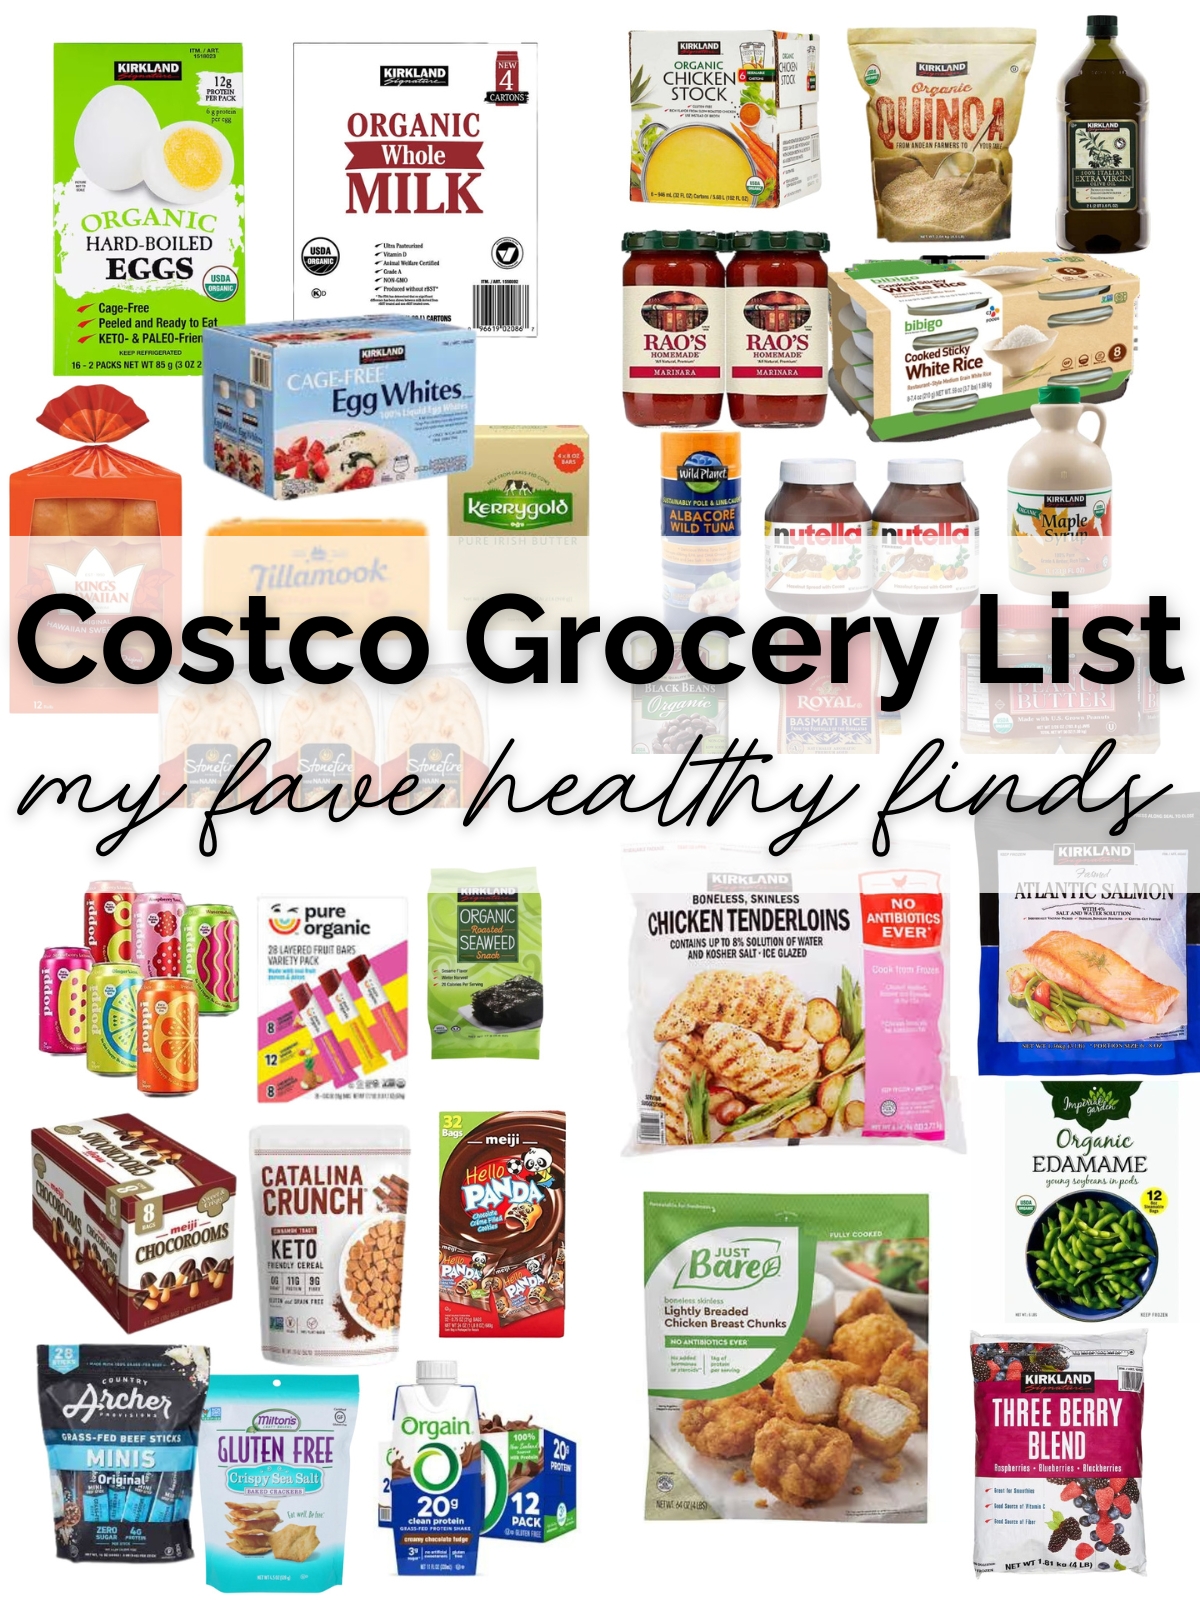 I Shop for One Person at Costco. Here Are the Best Things I Buy.